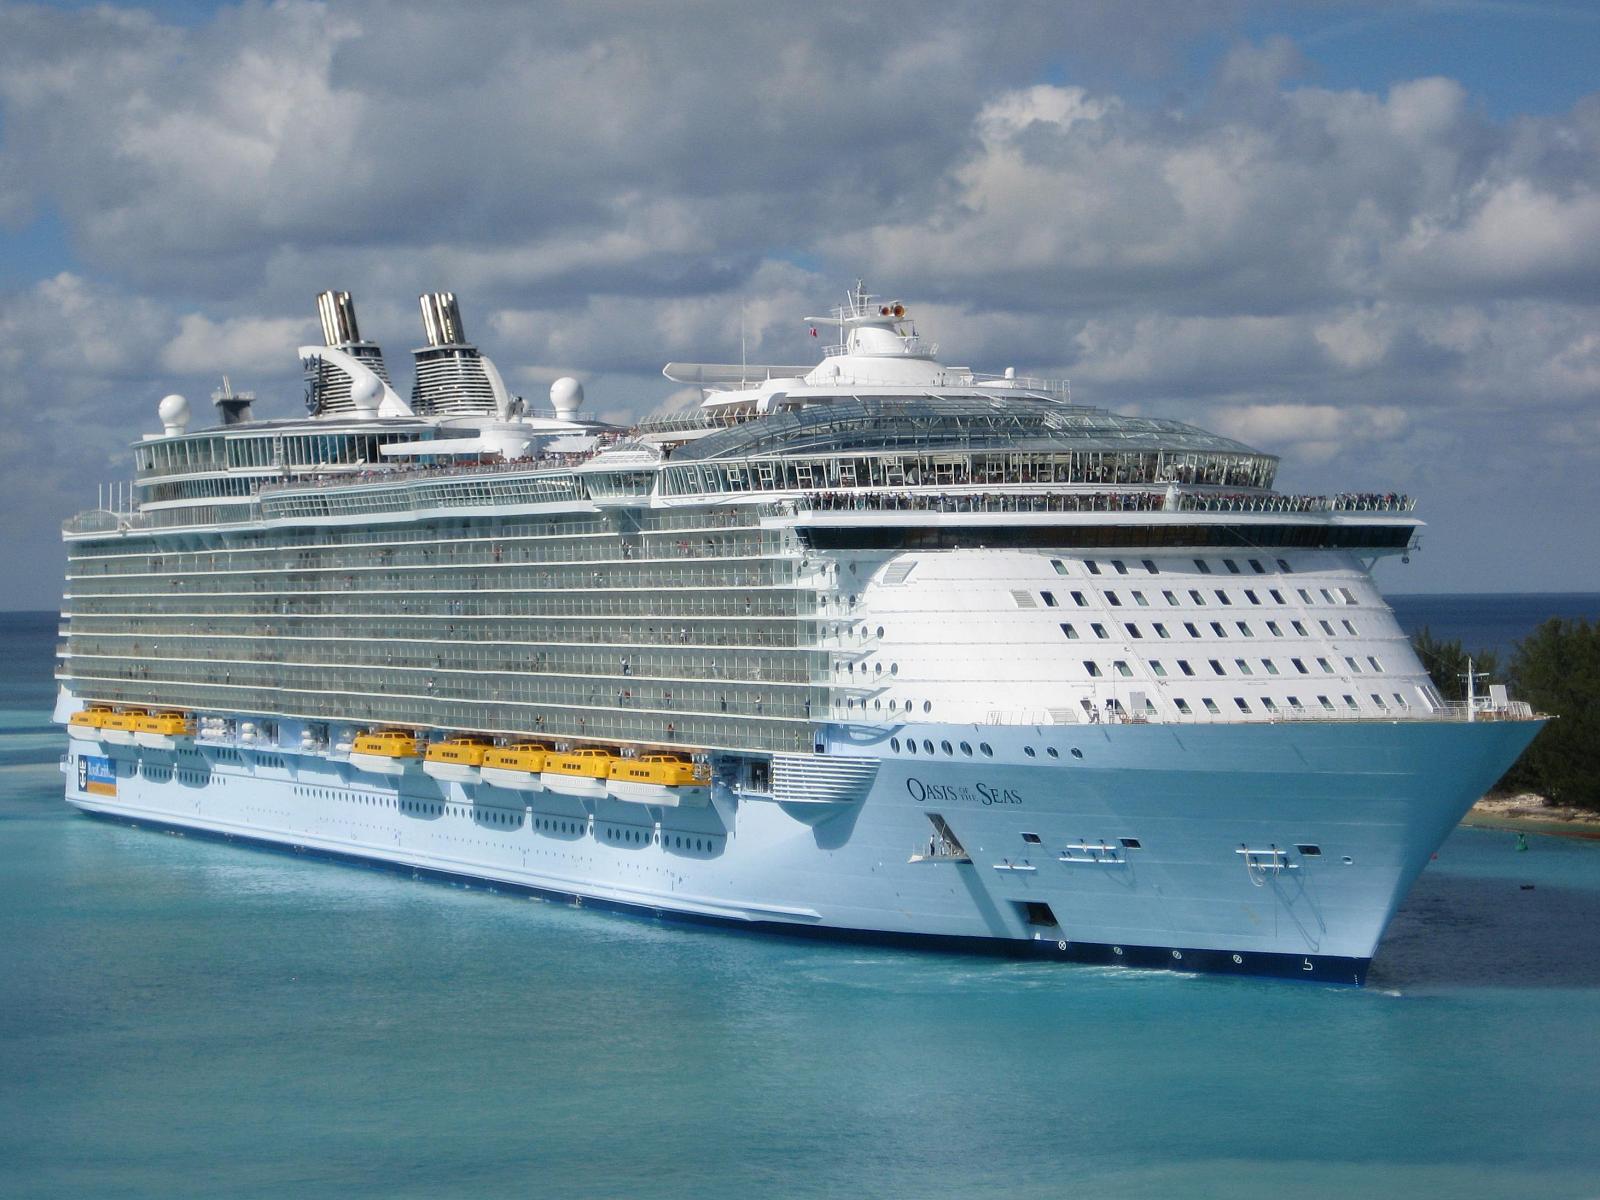 Oasis class from Royal Caribbean